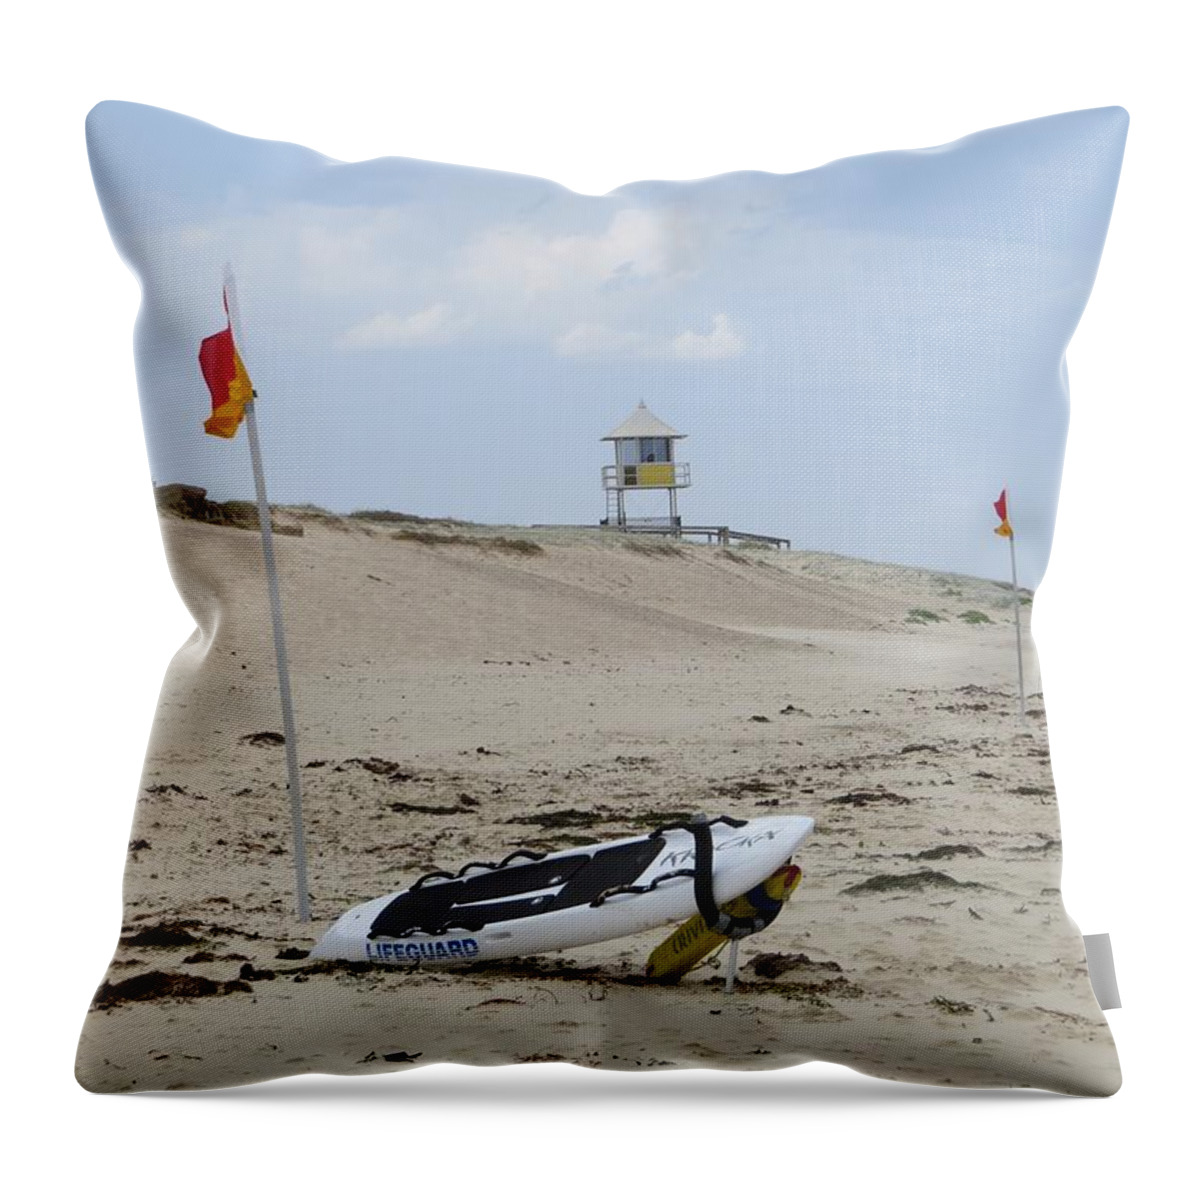 Surf Throw Pillow featuring the photograph But The Beach Is Empty by Amanda S Leek